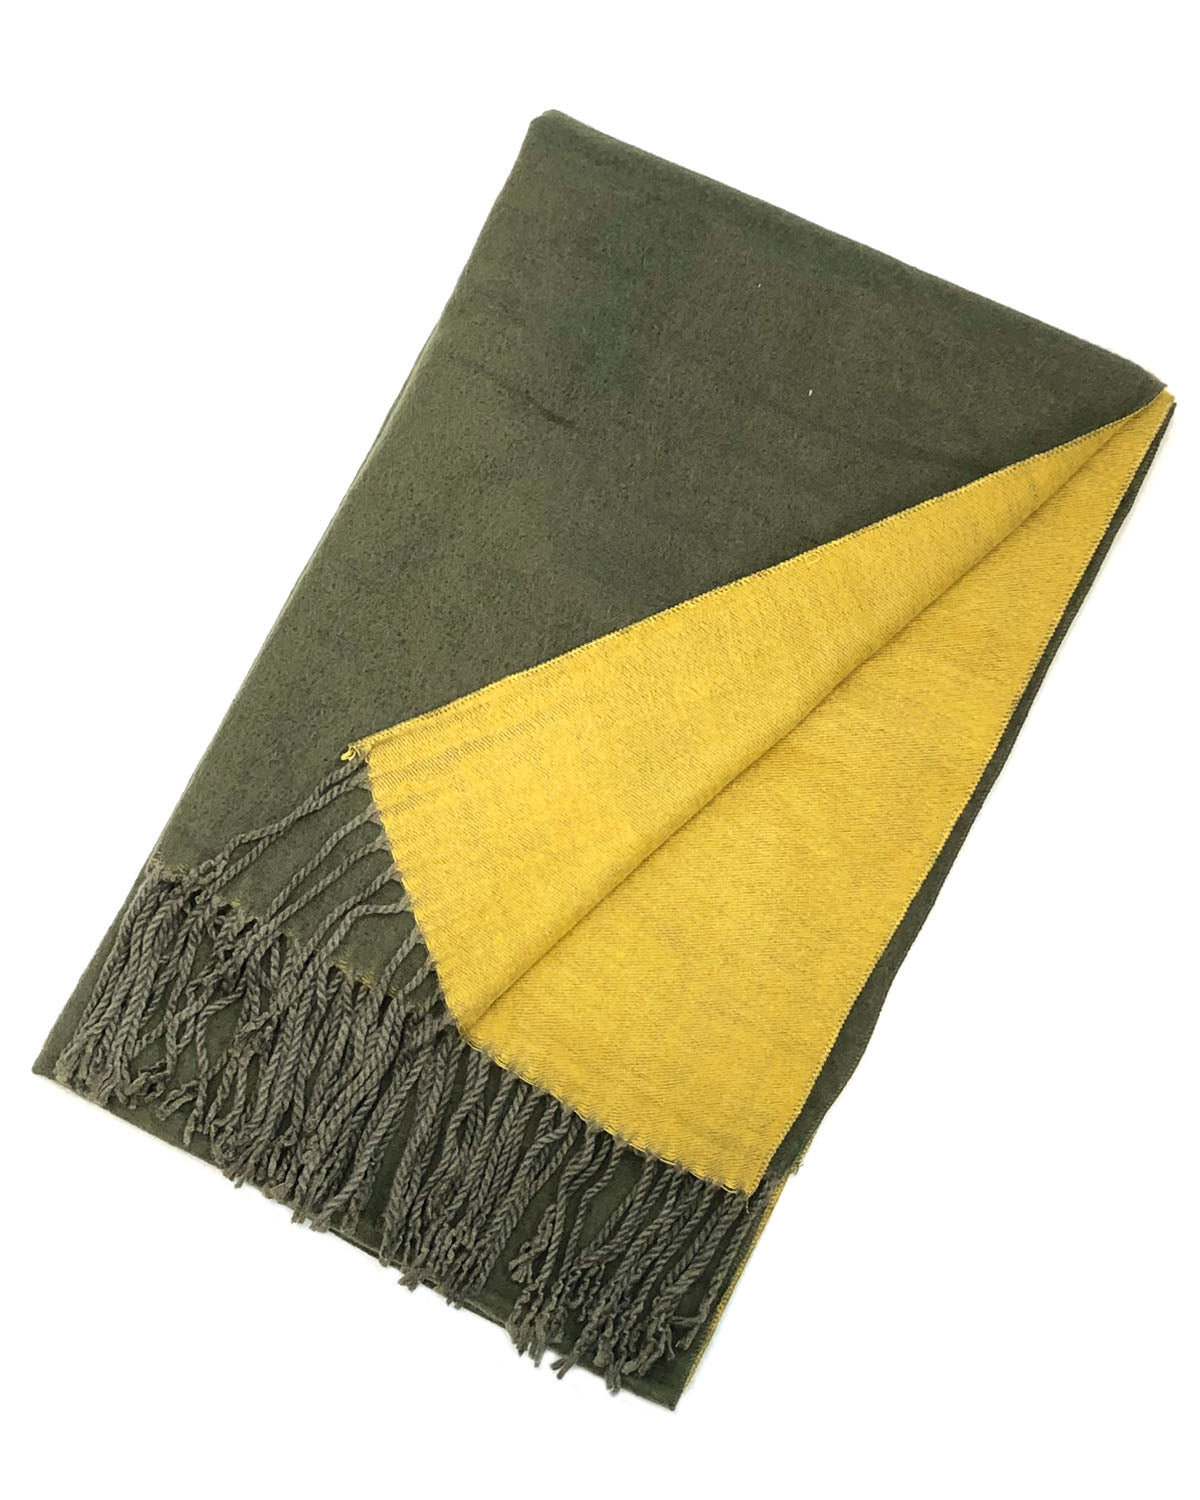 Wrapables Soft Cashmere Feeling Scarf, Large Two-Tone Winter Scarf Wrap Shawl